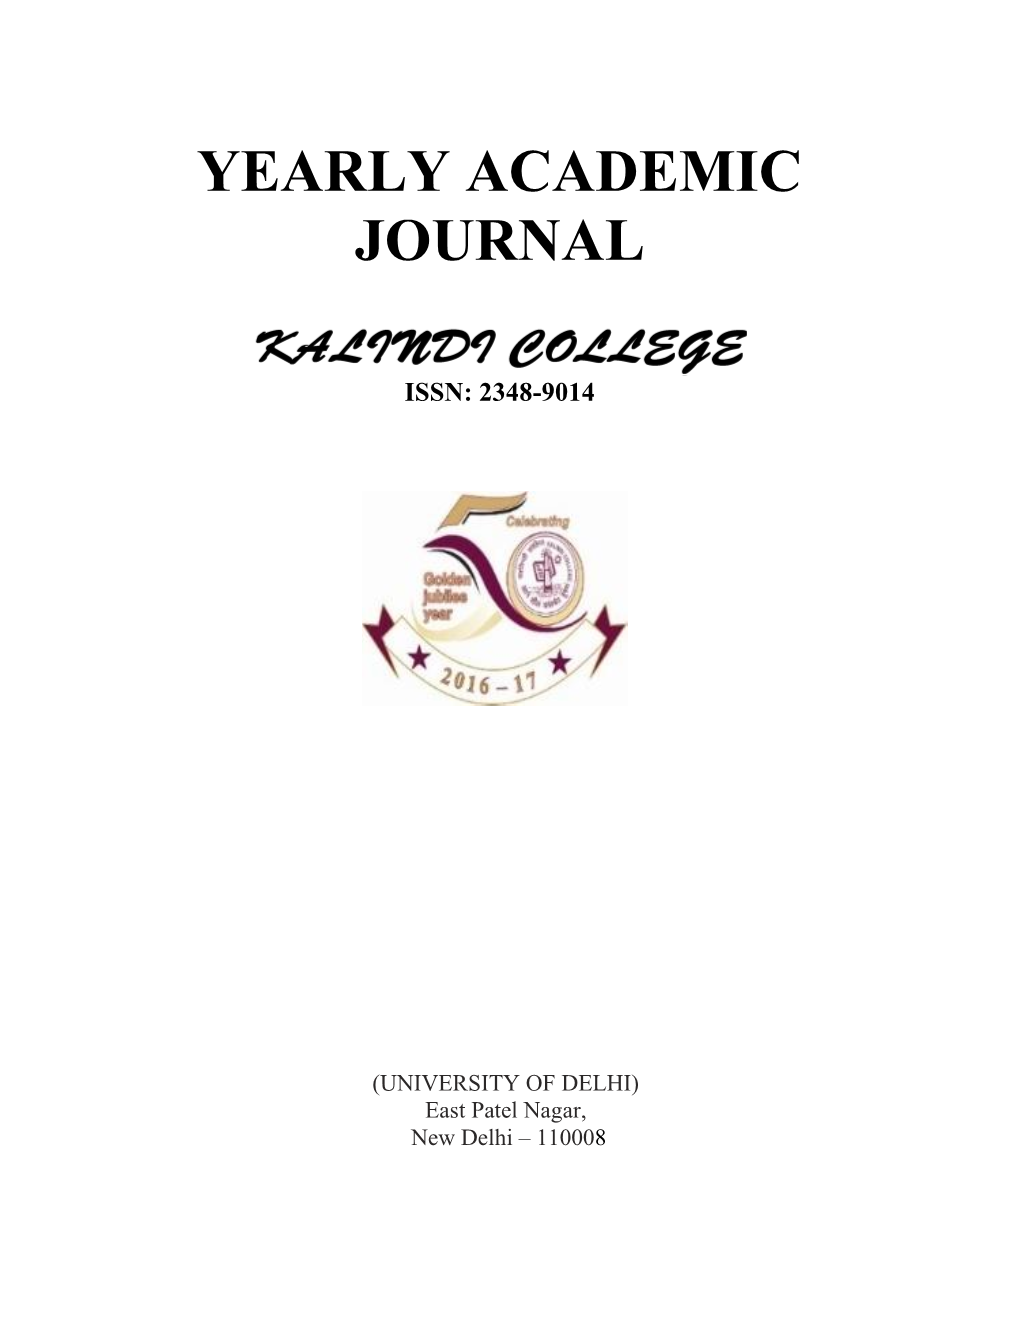 Yearly Academic Journal